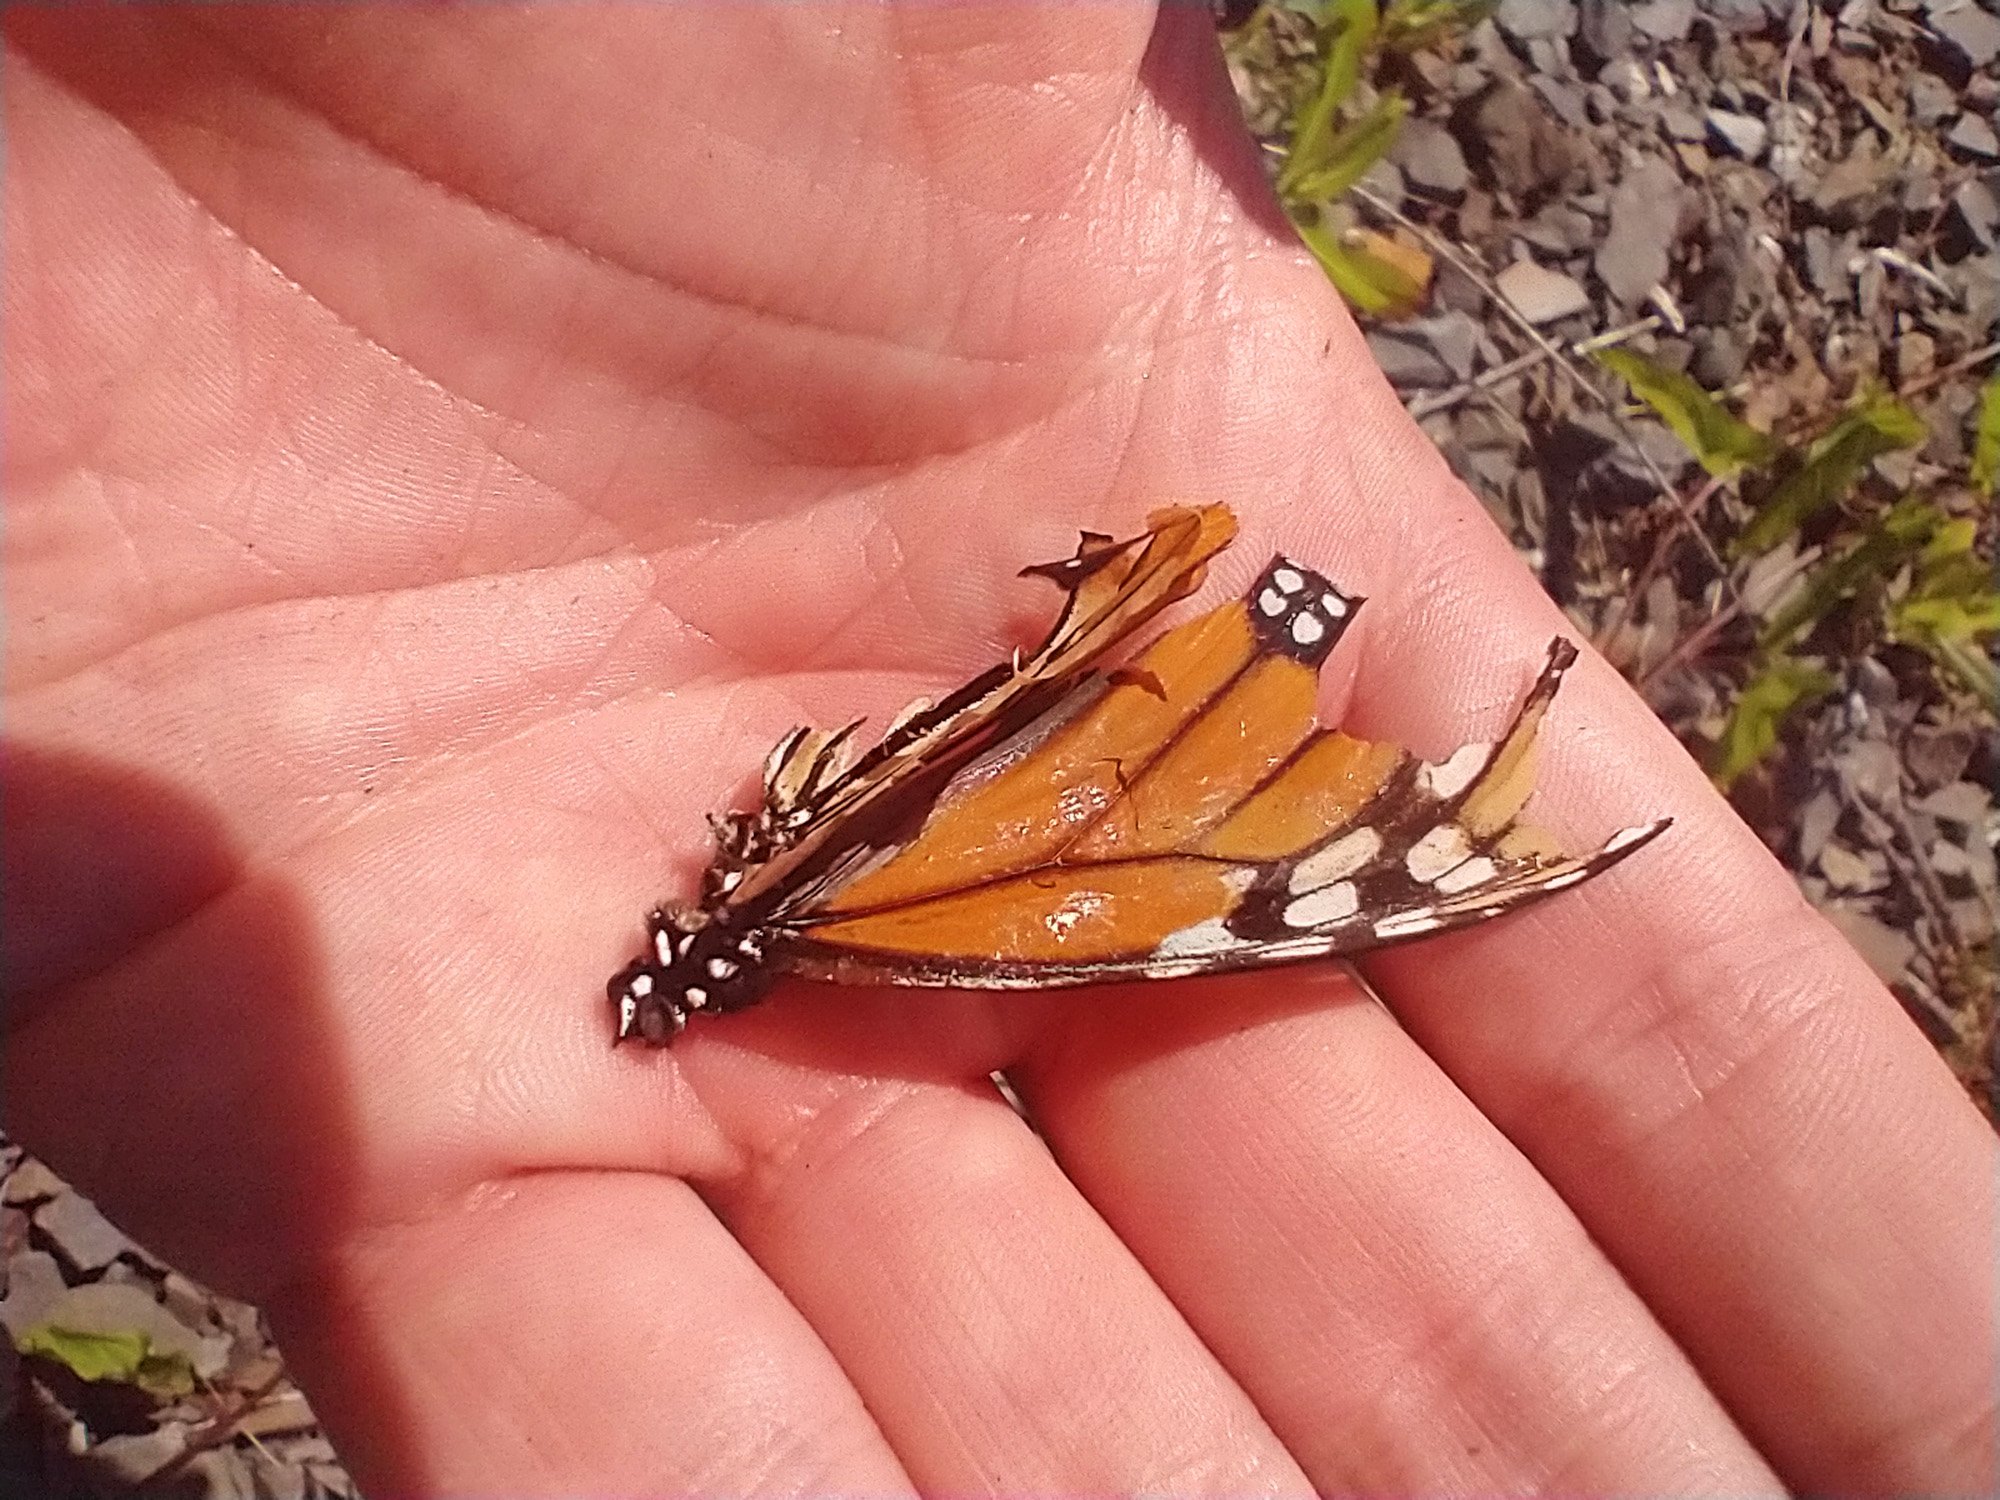 Hadn't seen any of these Monarch butterflies in a while. They've become rare.